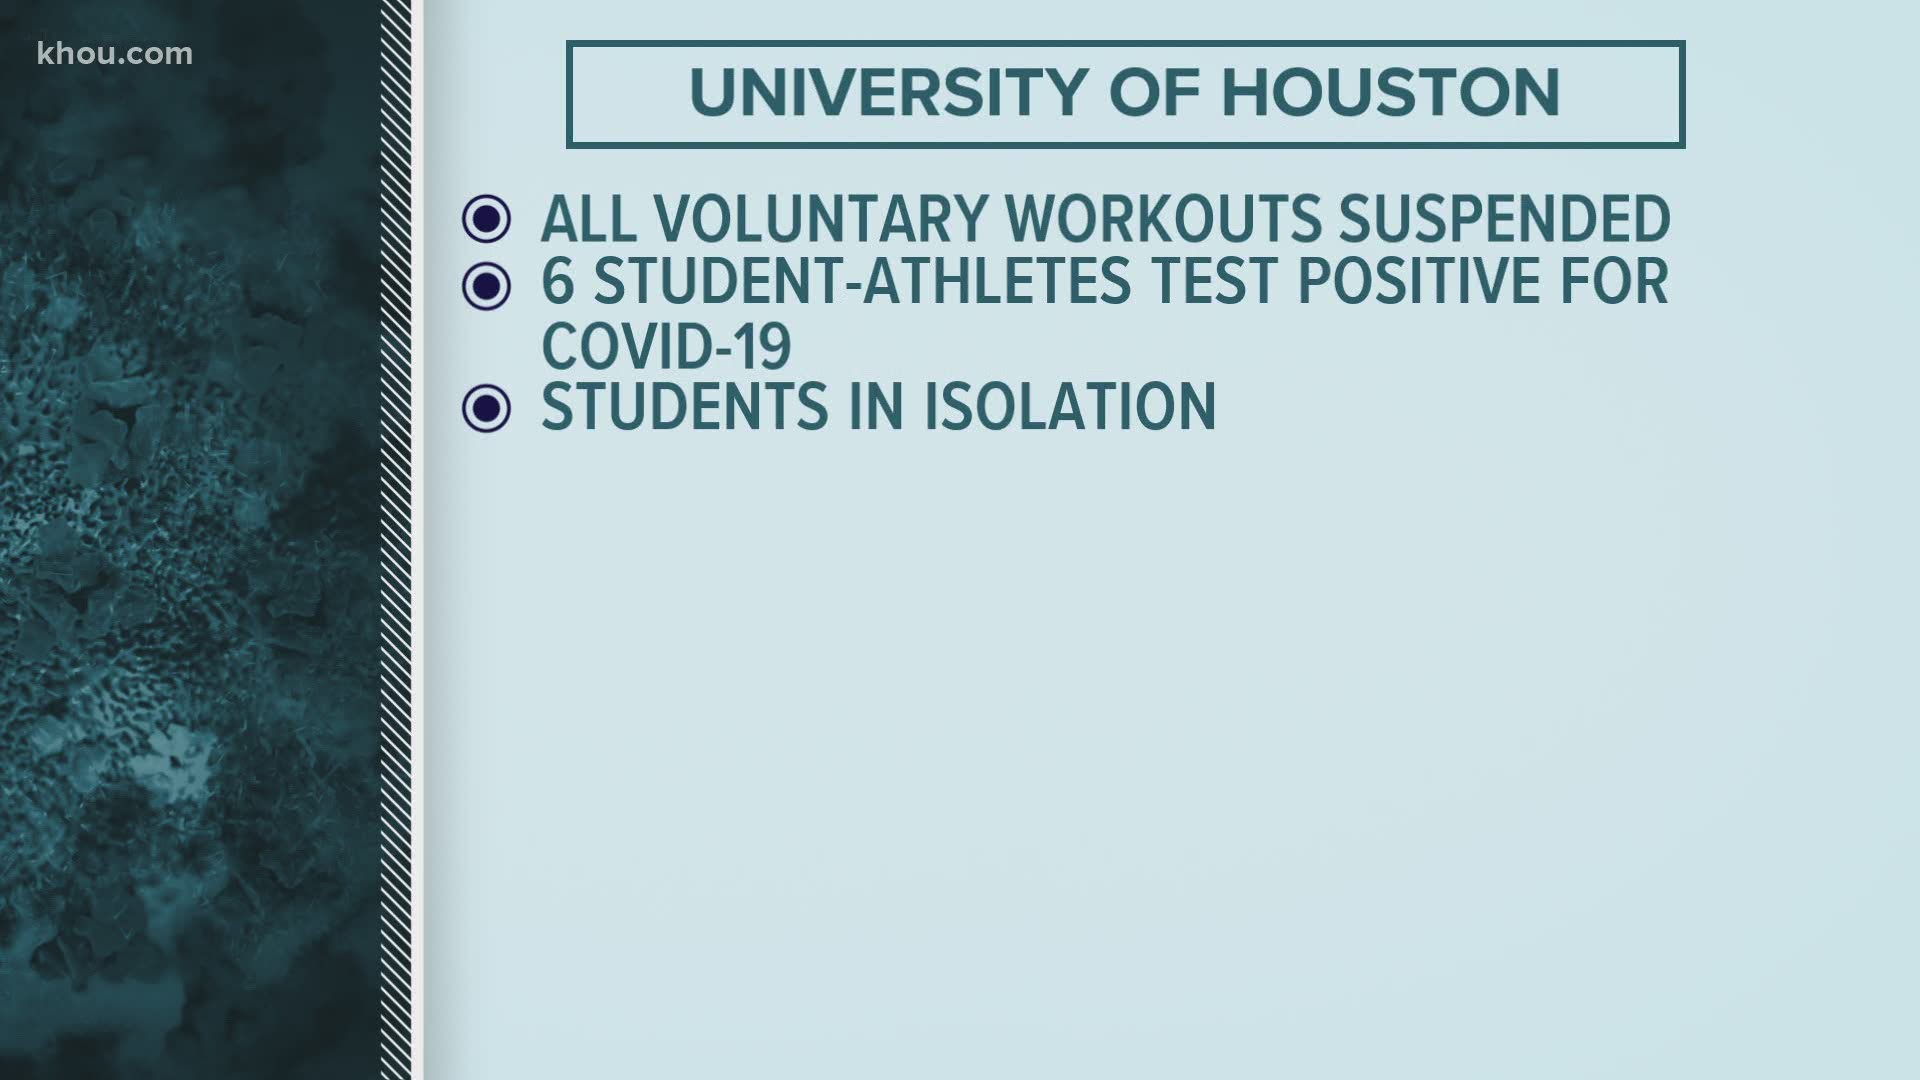 The University of Houston has suspended all voluntary workouts for student-athletes after six student athletes tested positive for the COVID-19.